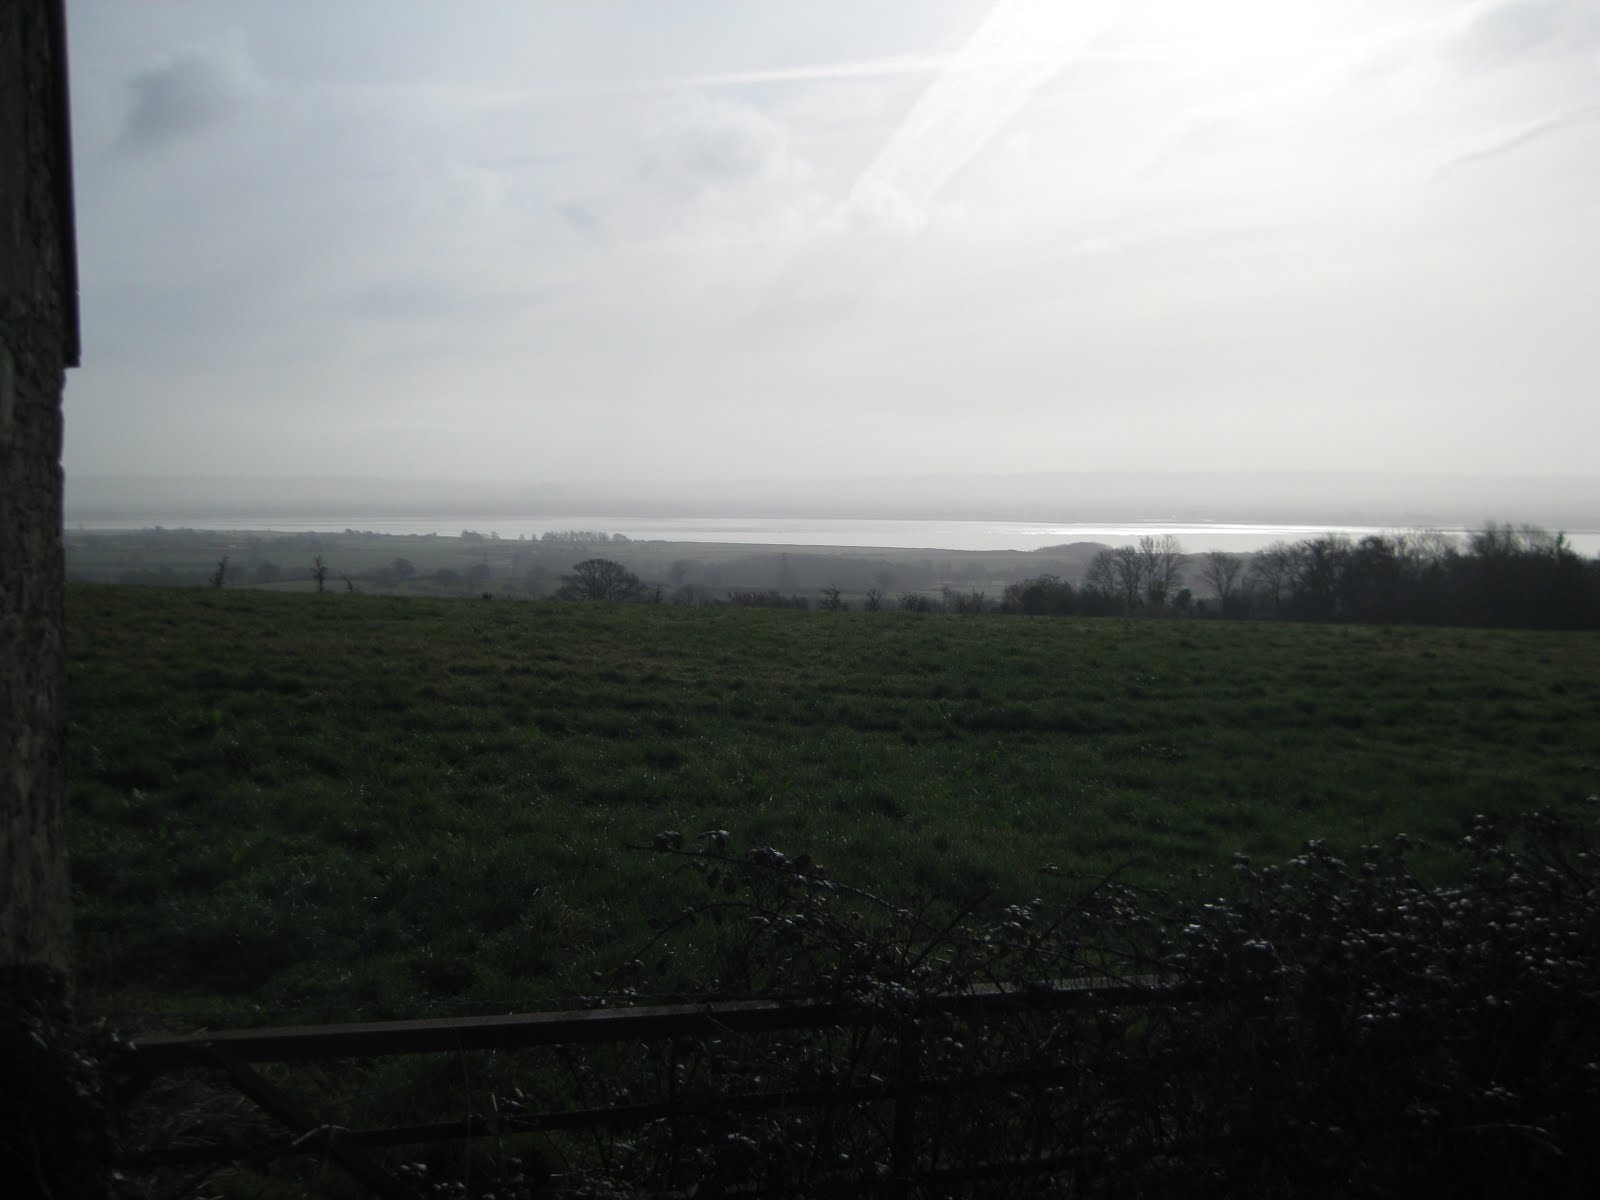 Overlooking the Severn